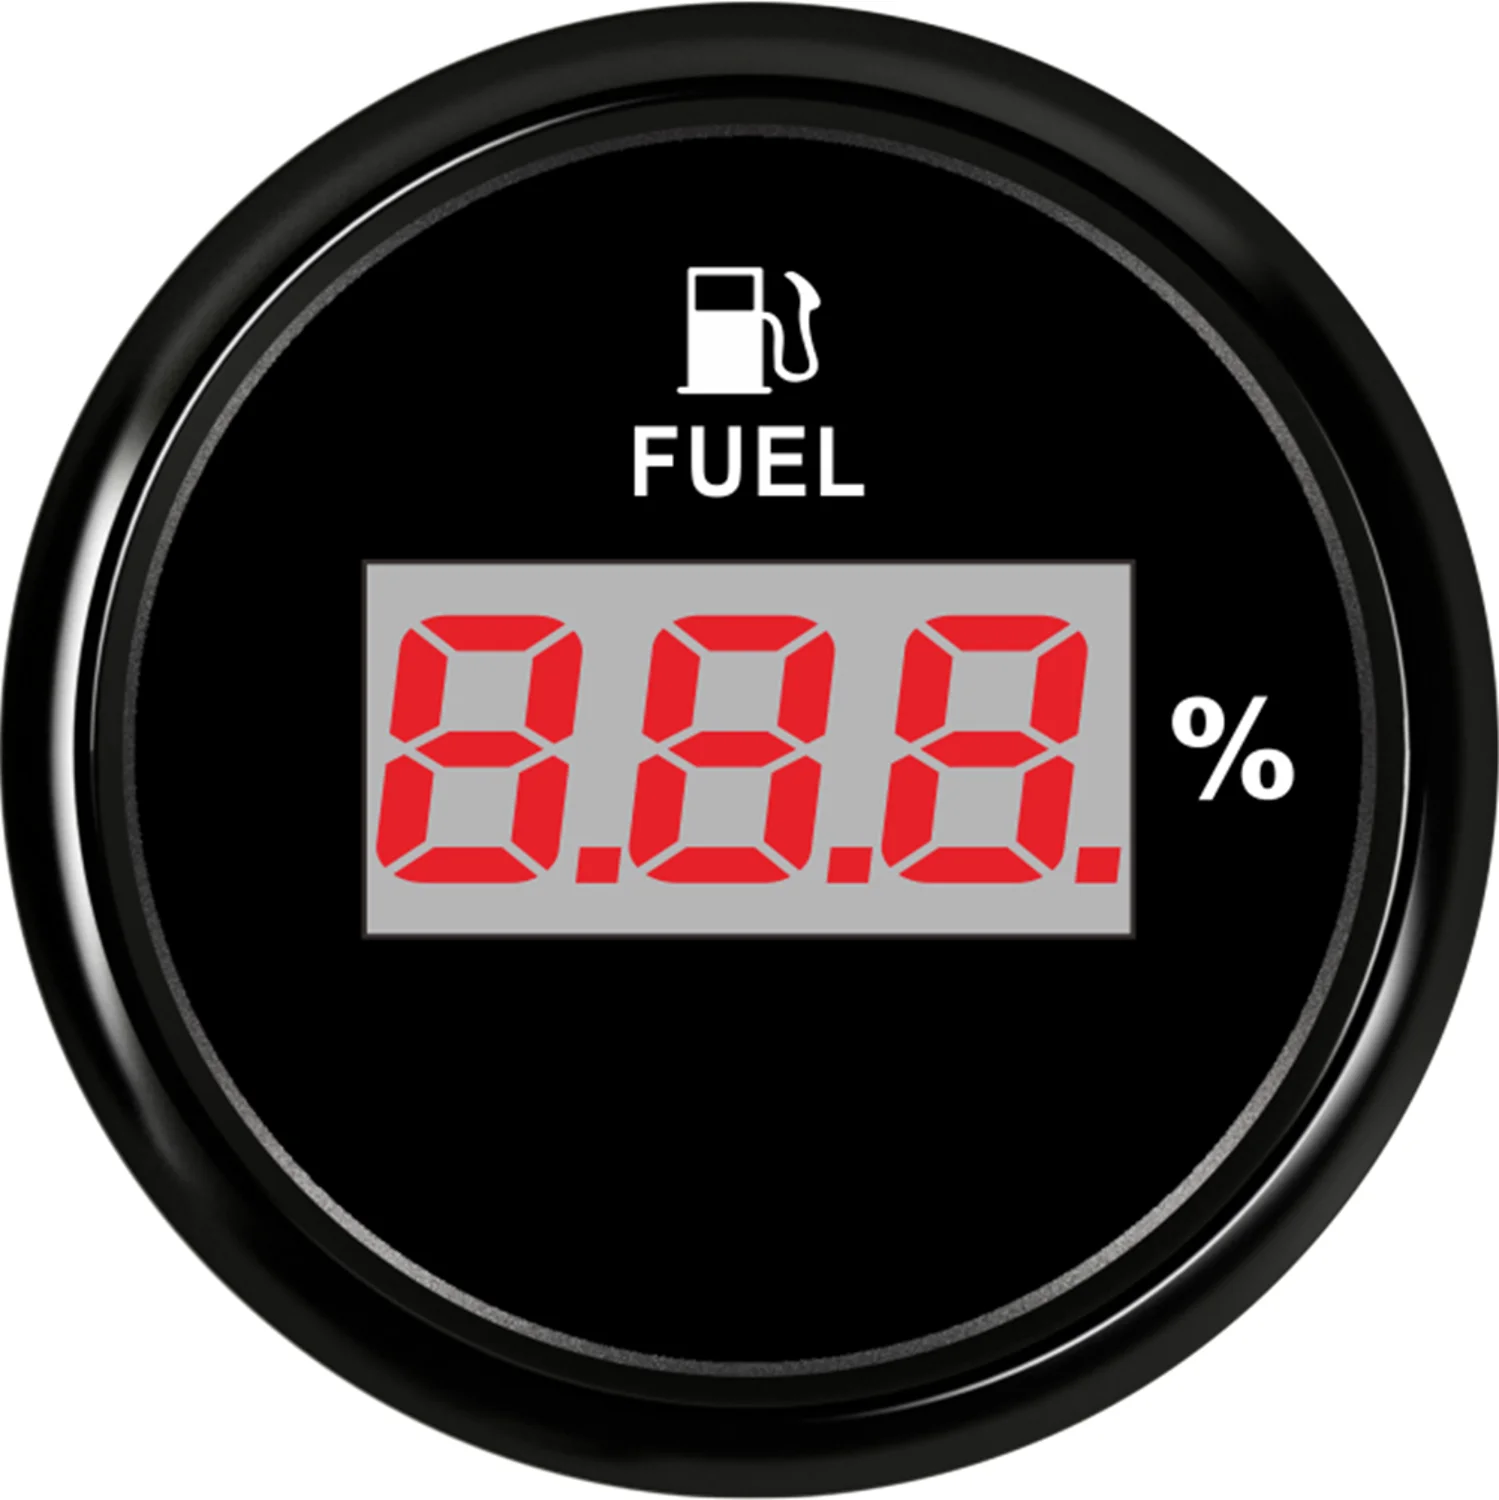 

1pc Brand New 52mm Digital Fuel Level Gauges Auto Fuel Level Meters 9-32v for Boat or Automobile Truck Yacht Vessel